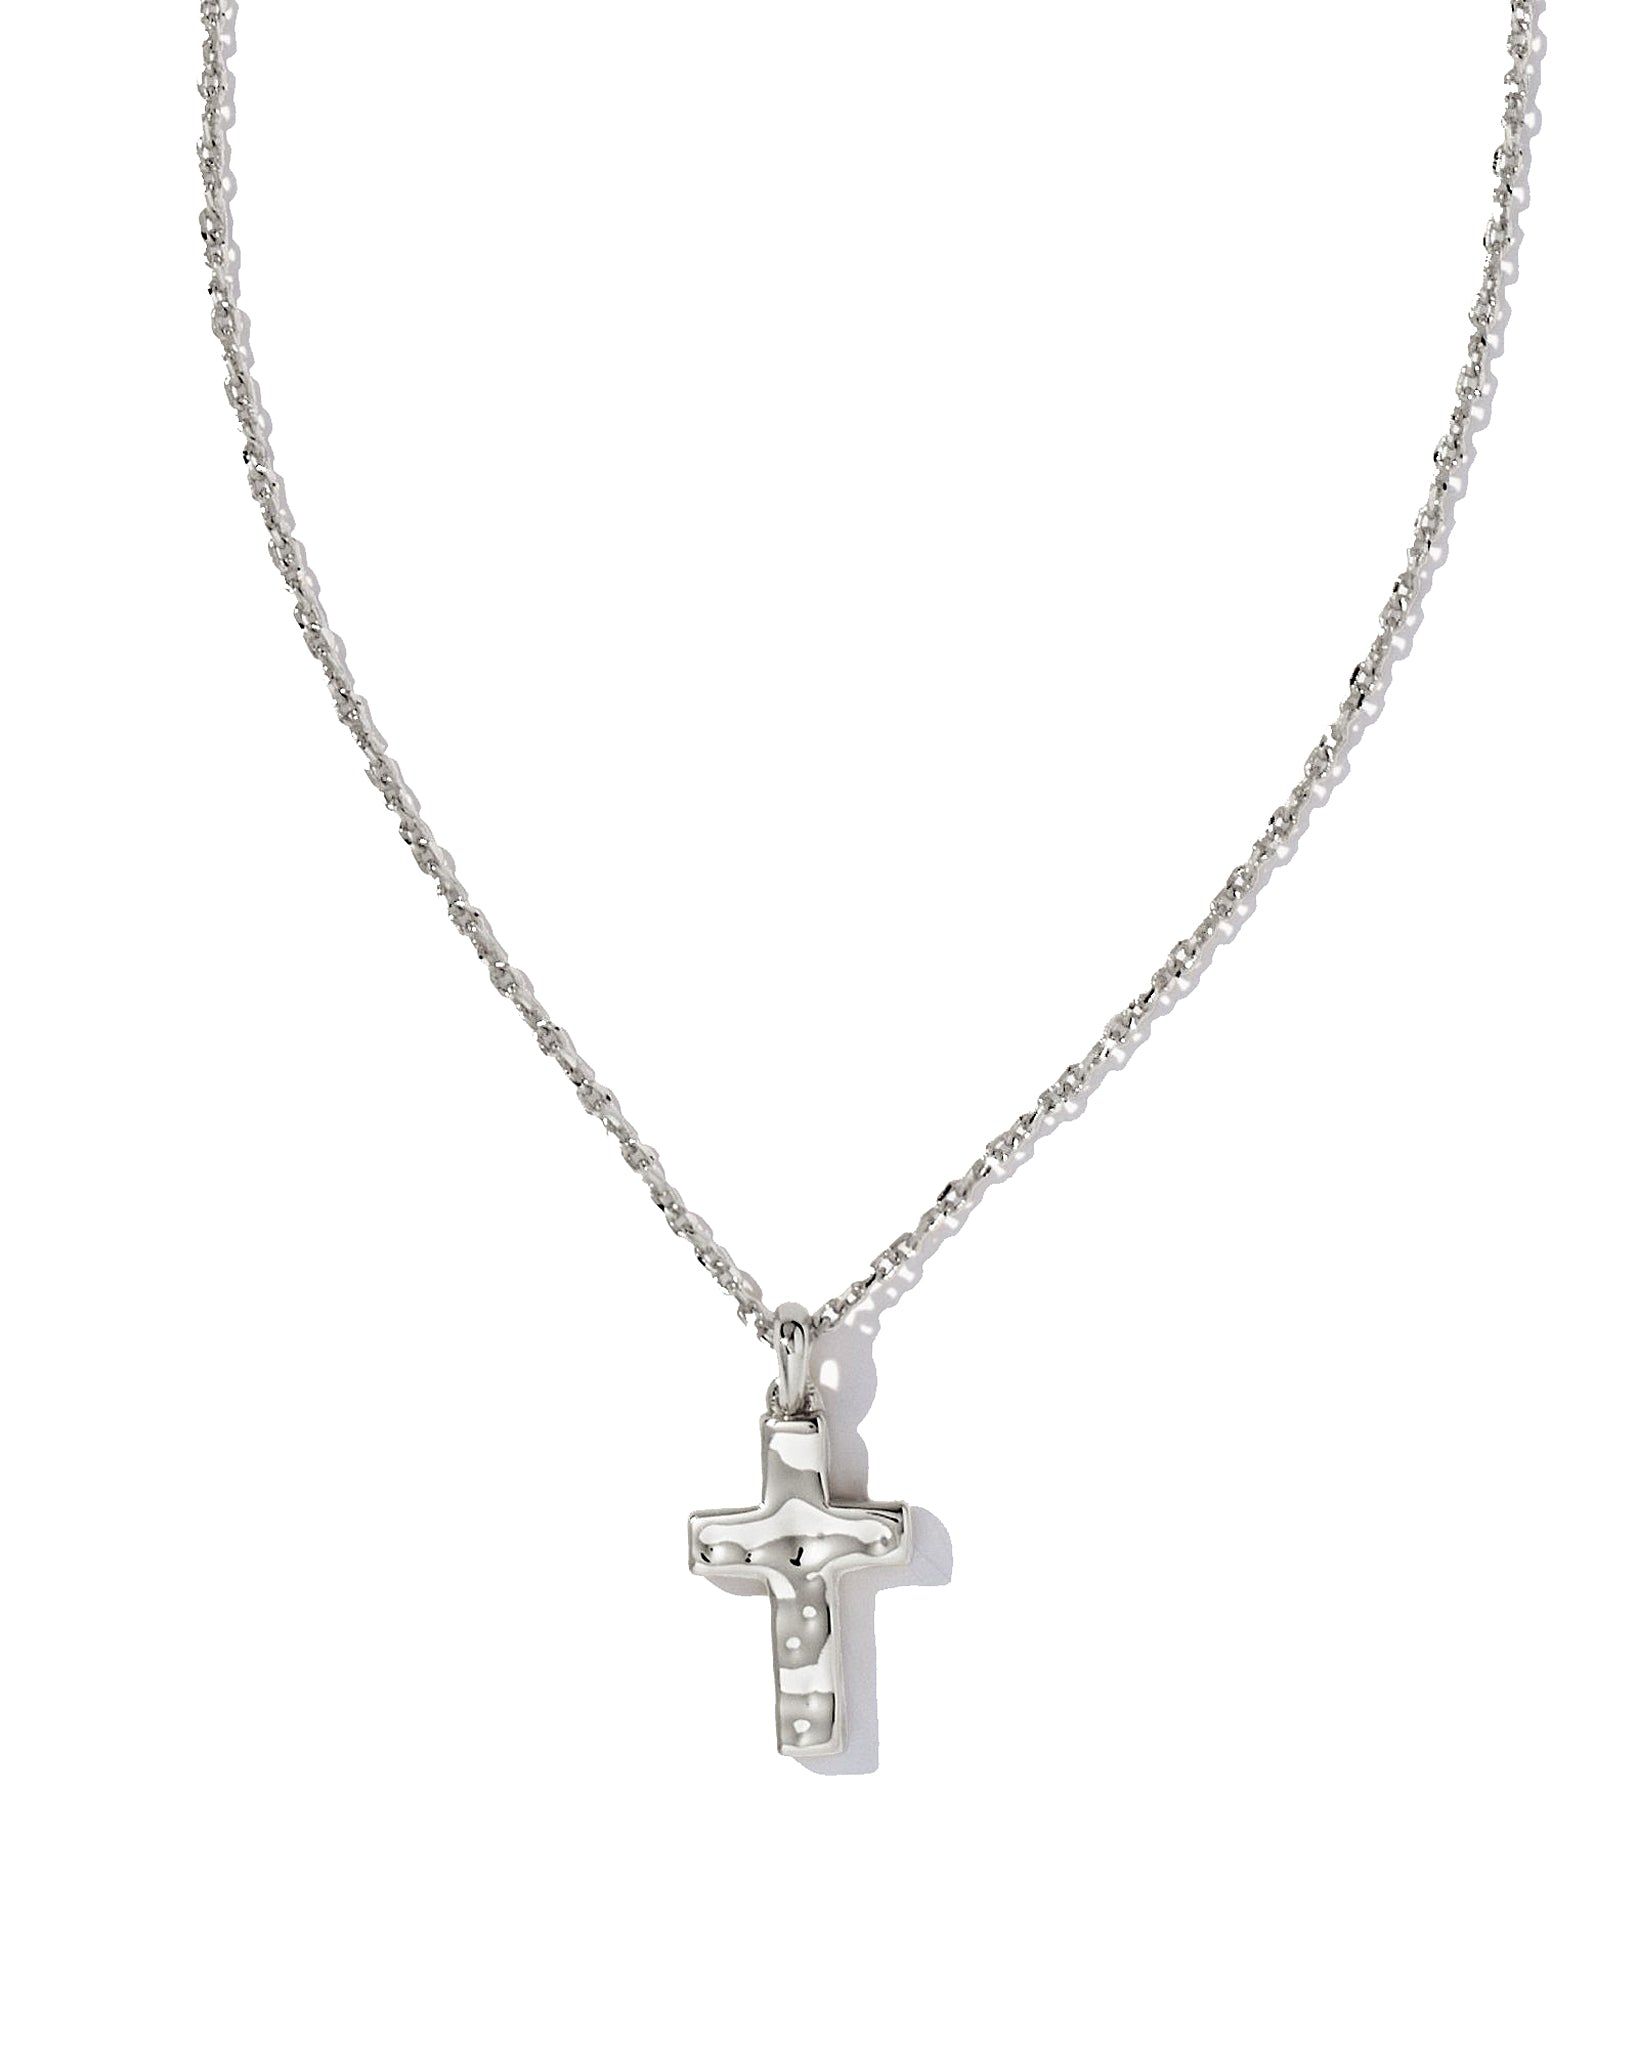 Kendra Scott Cross Pendant Necklace in Hammered Rhodium Plated